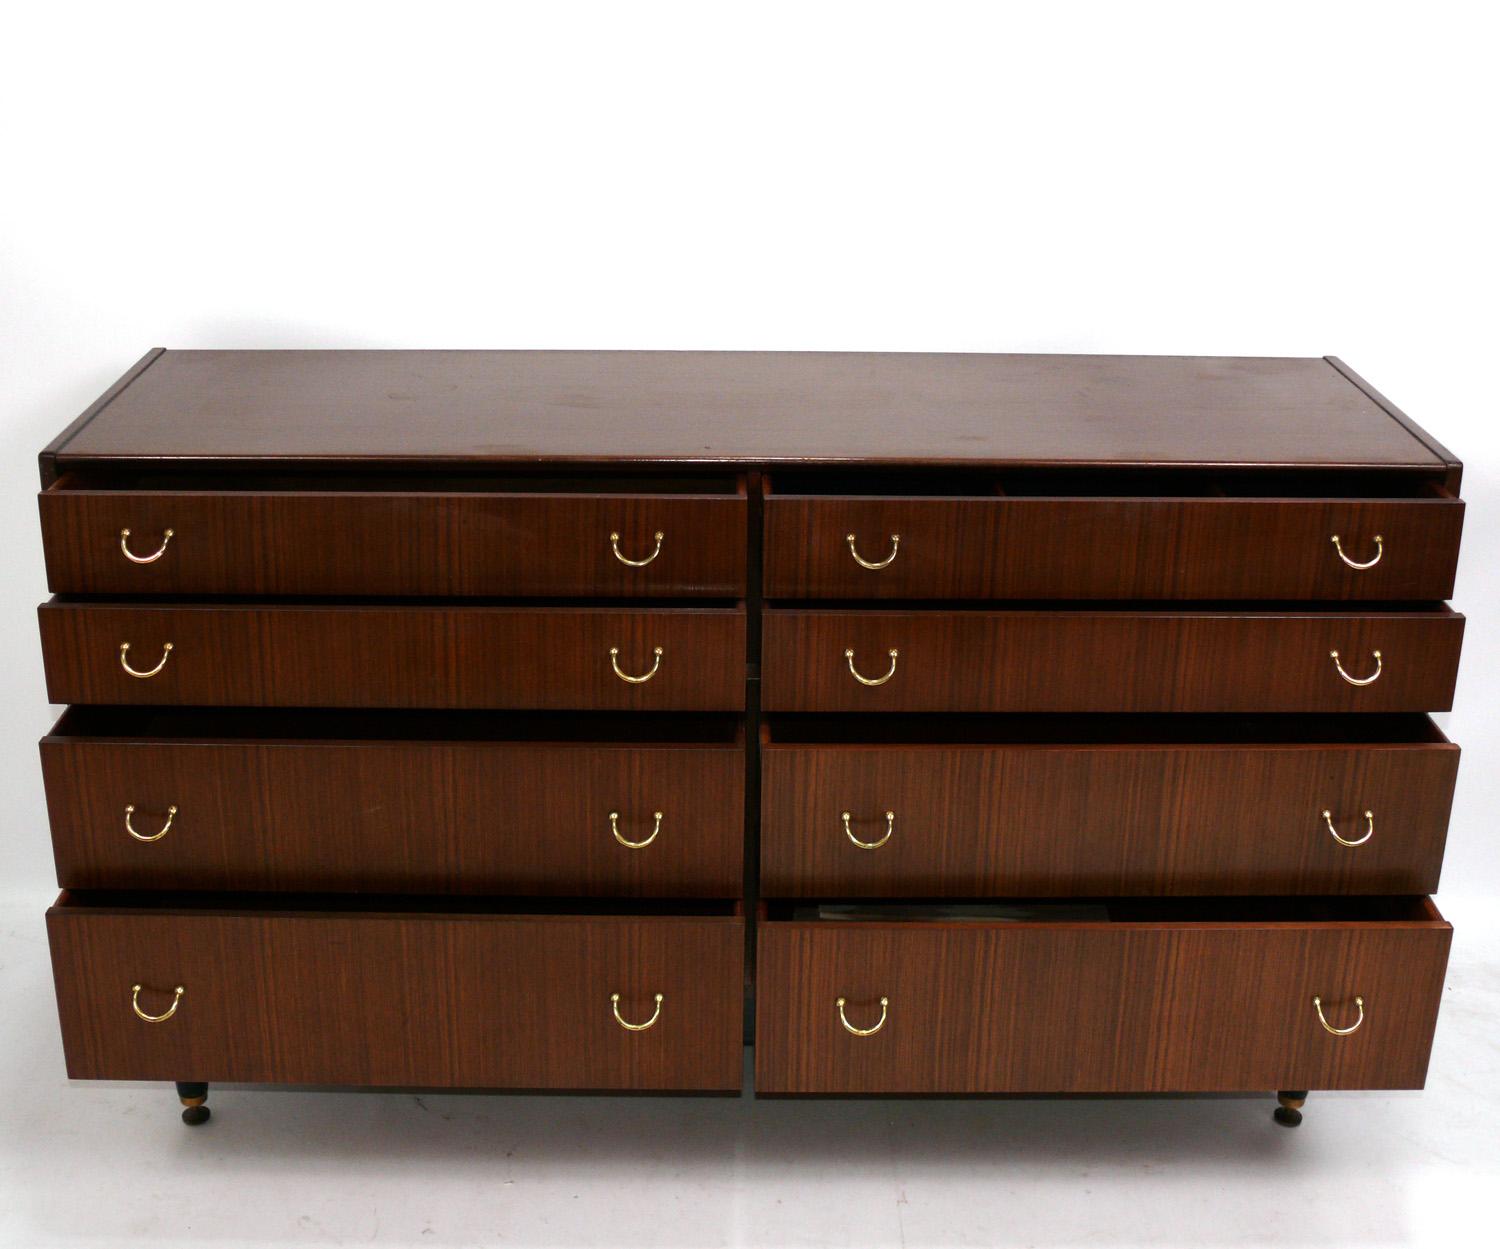 English Danish Modern Style Chest or Dresser by G Plan, circa 1960s For Sale